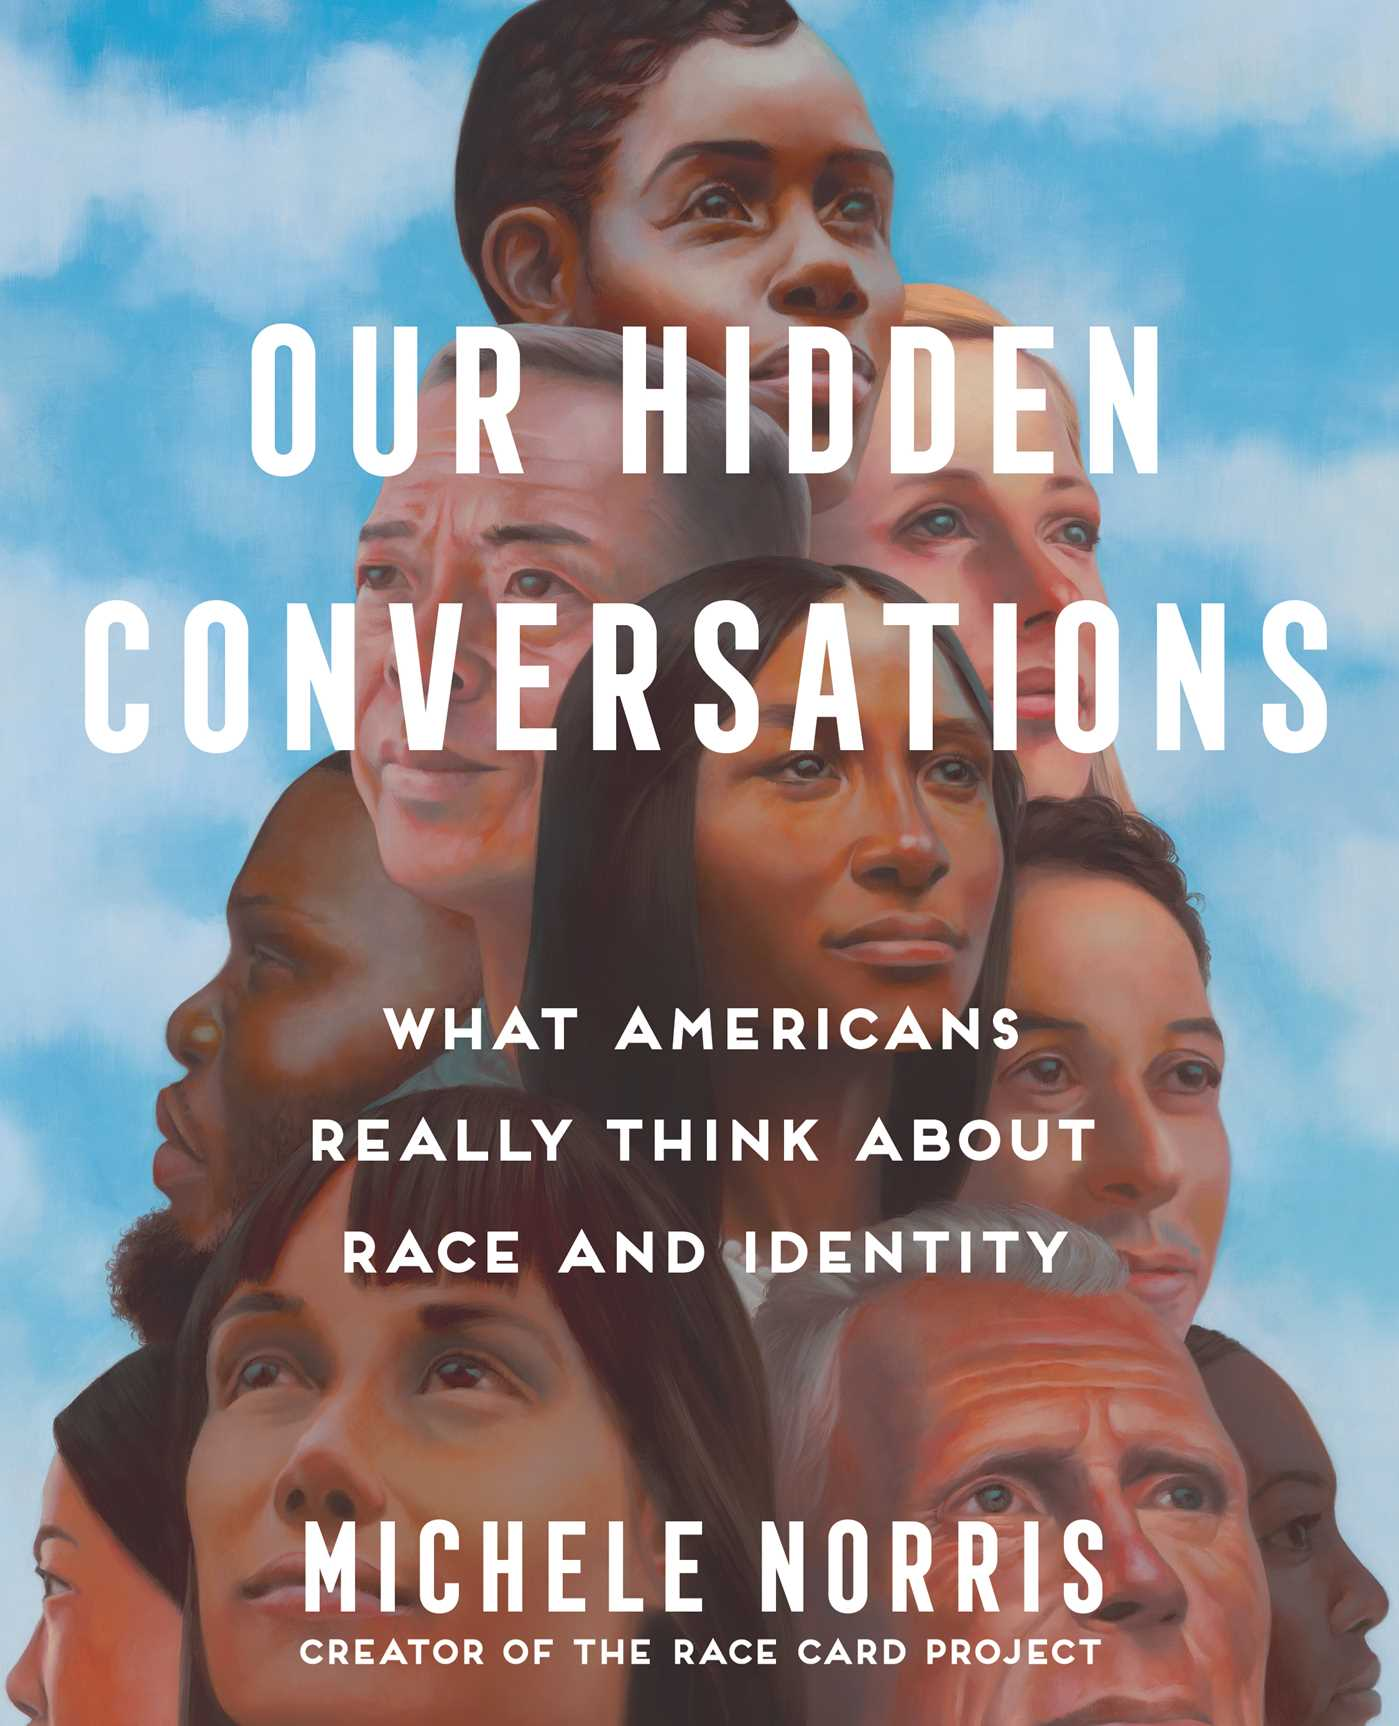 What do Americans think about race? Michele Norris reveals 'Our Hidden Conversations'